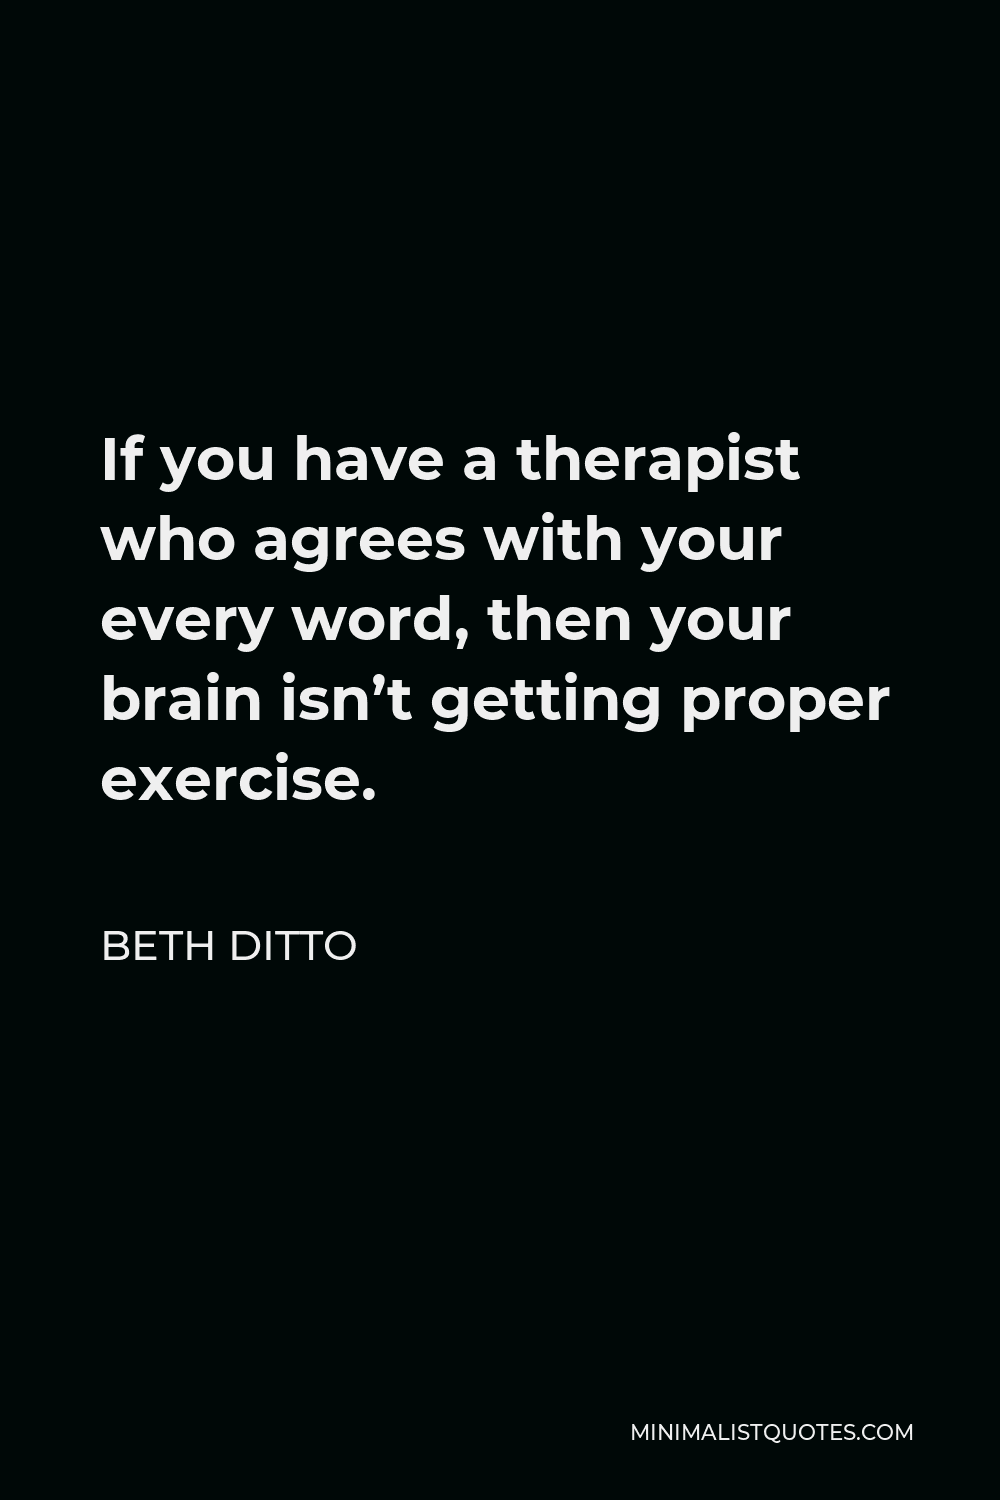 Beth Ditto Quote - If you have a therapist who agrees with your every word, then your brain isn’t getting proper exercise.